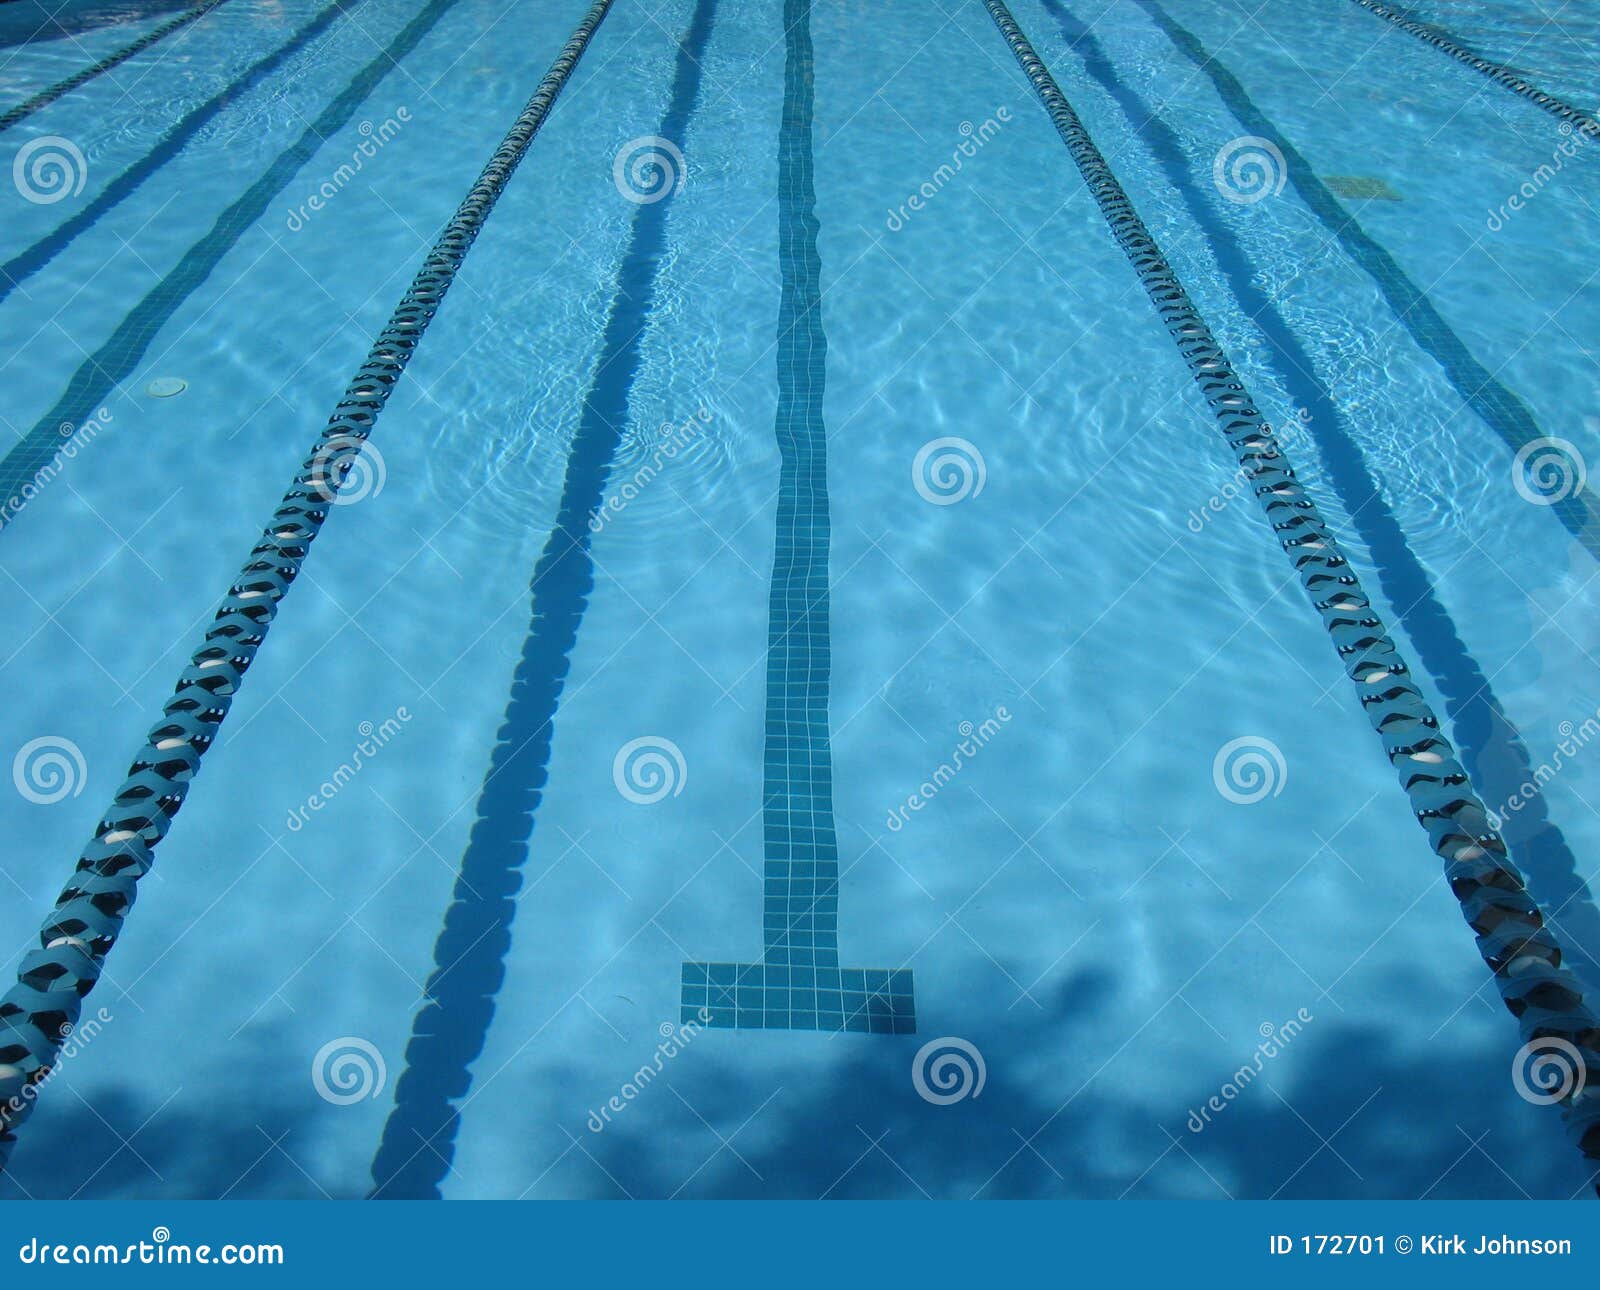 Competitive Swimming Pool Lanes - Viewing Gallery